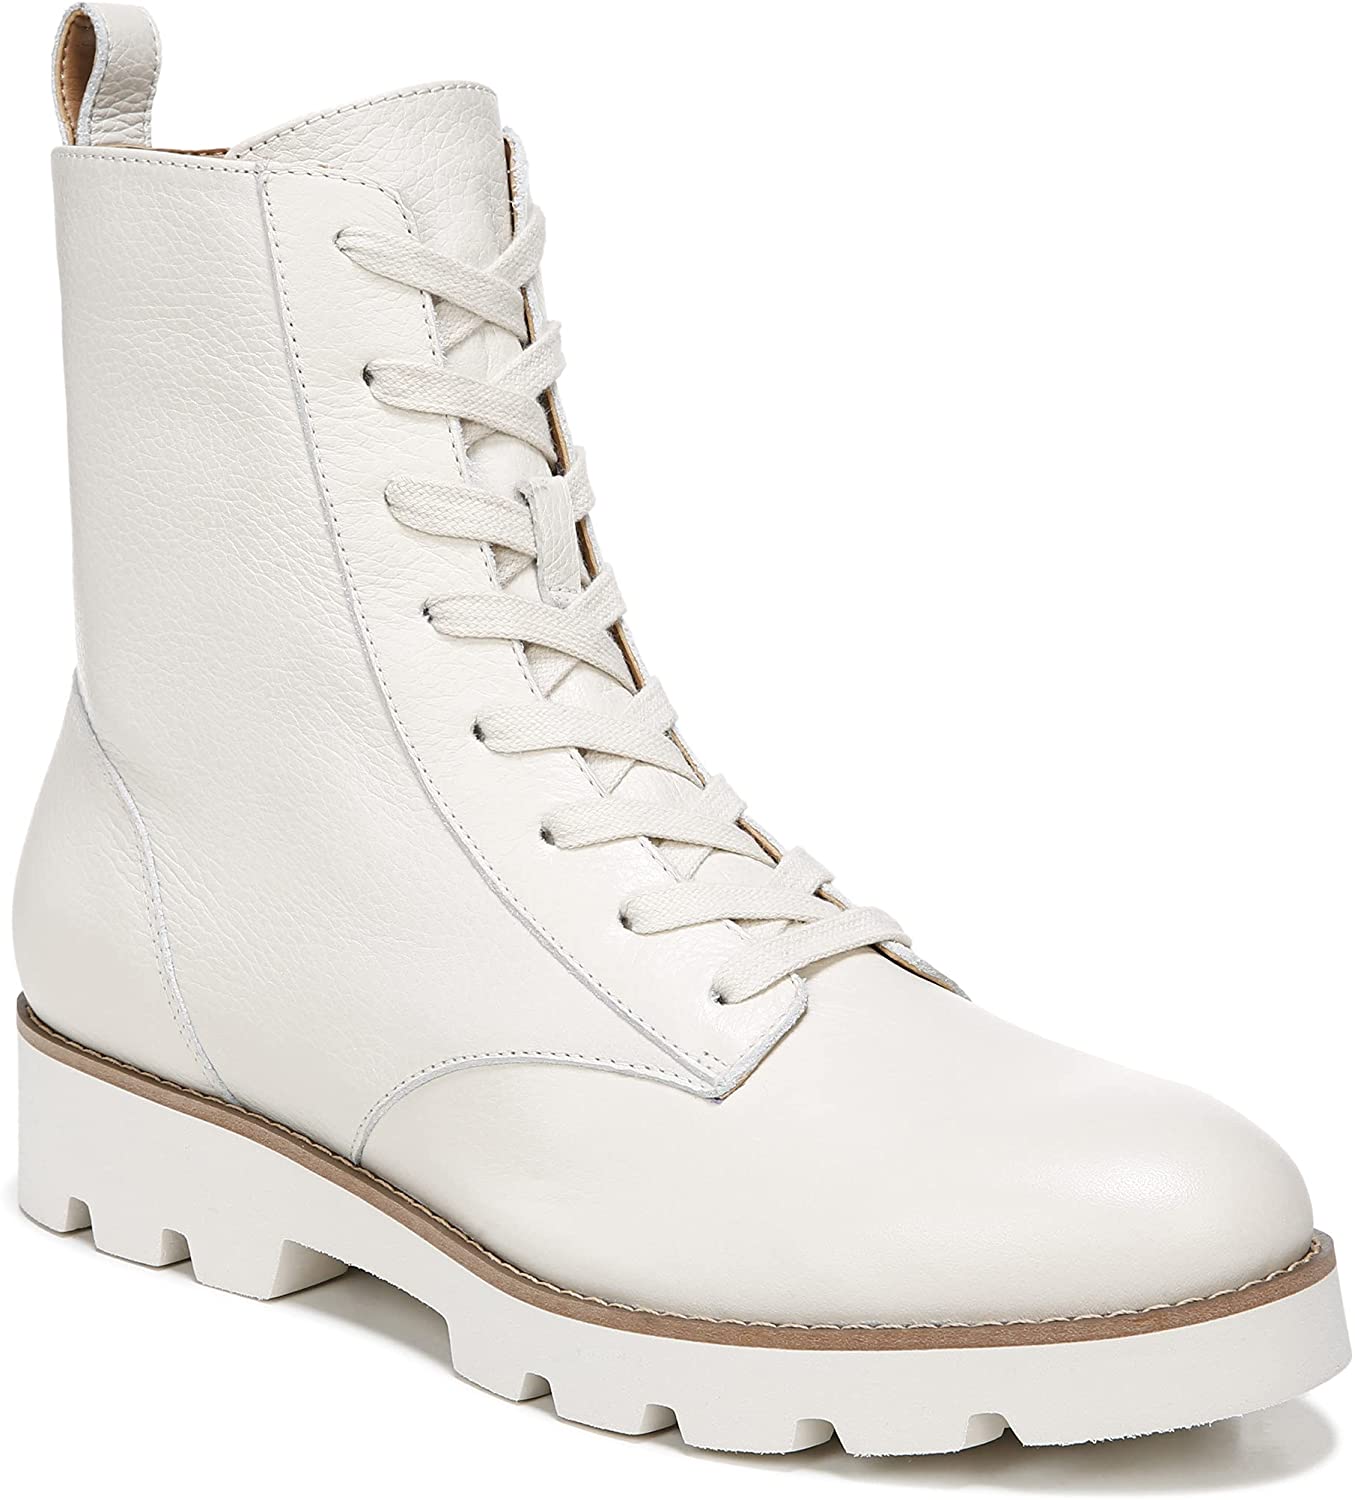 ‘Winter White’ Boots Are The Hottest Footwear Trend To Shop This Black Friday, And We Have Recommendations